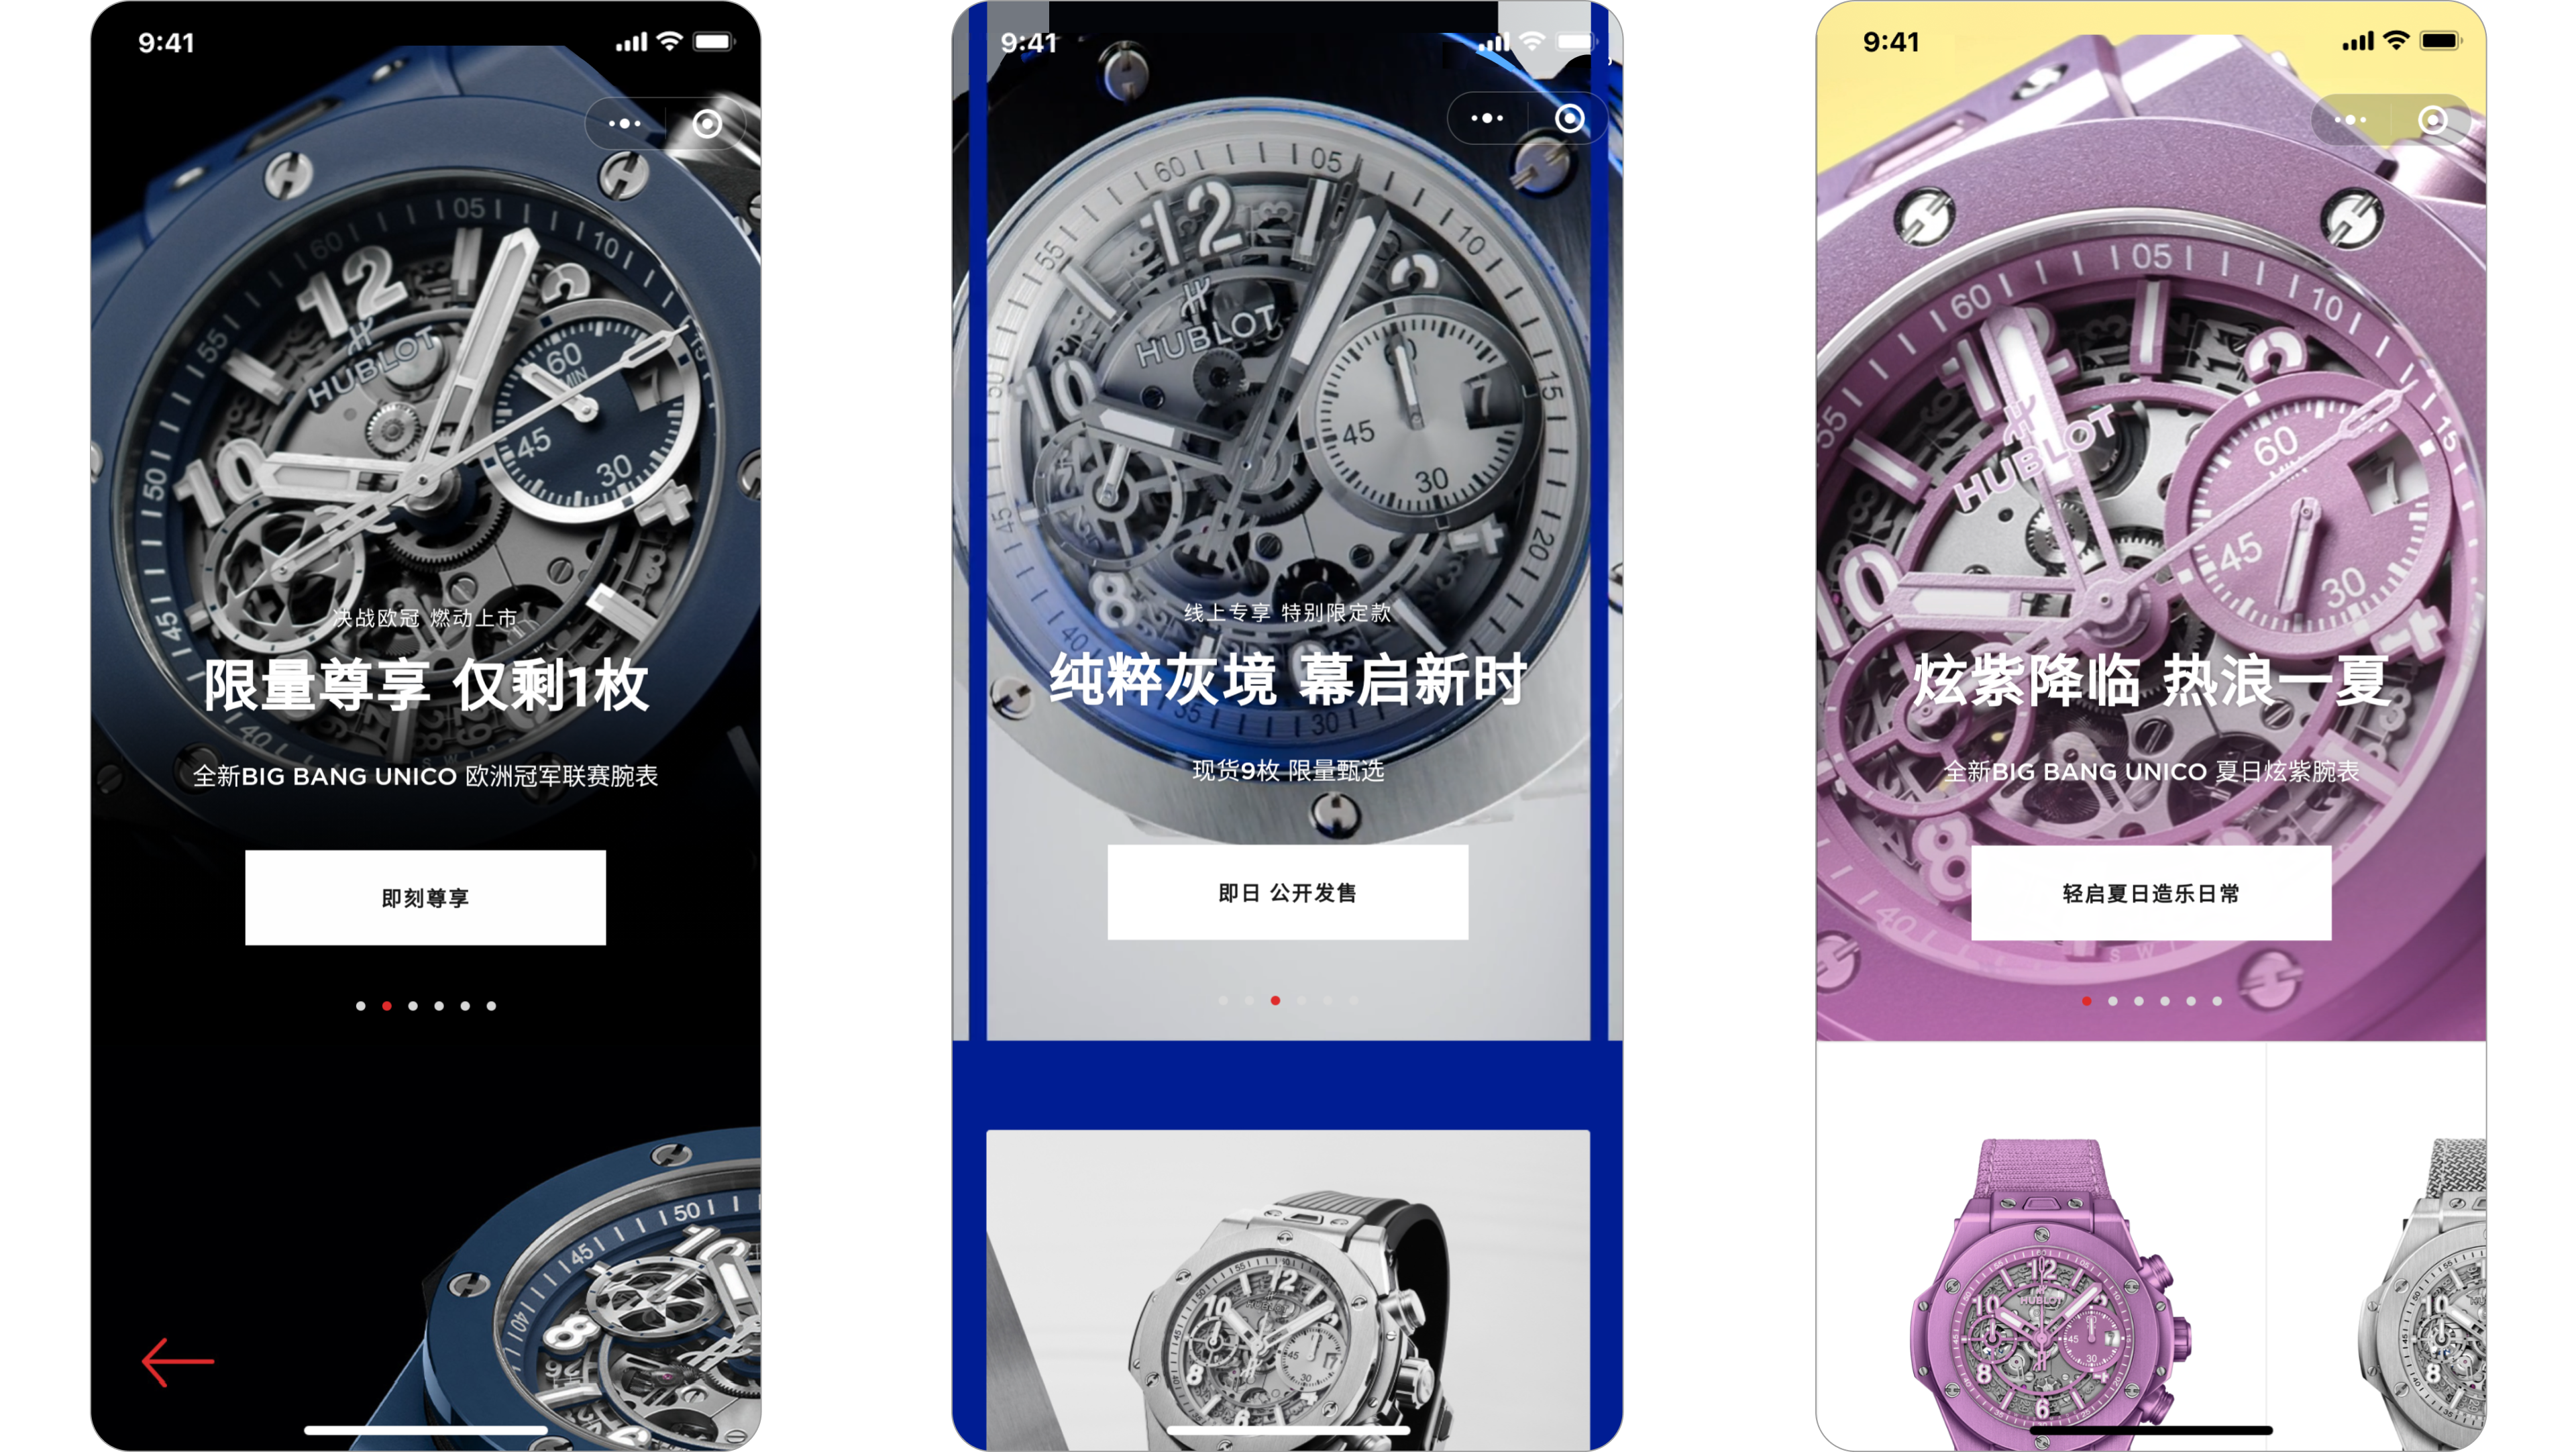 The current Homepage of the Hublot WeChat Mini Program with colorful animations and slider